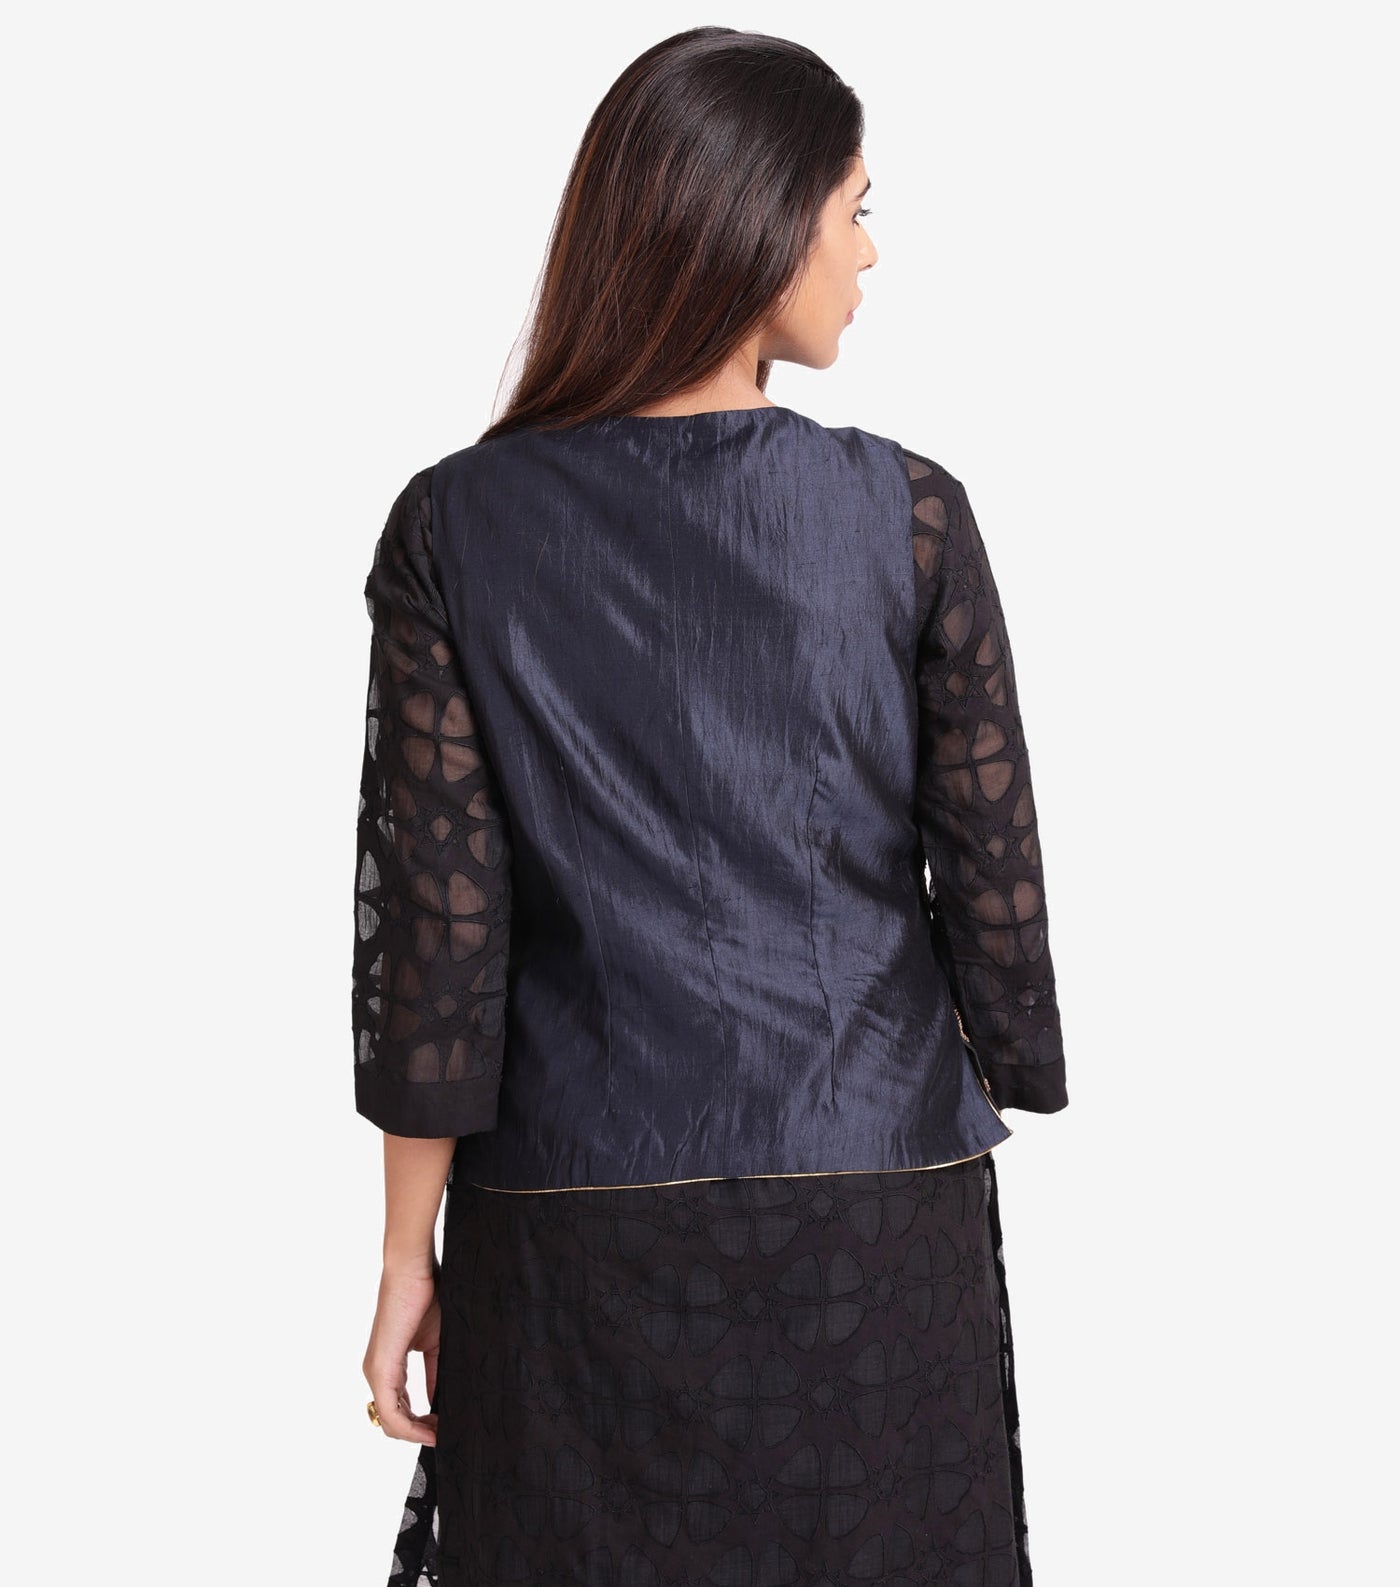 Navy Blue Hand Embroidered Jacket